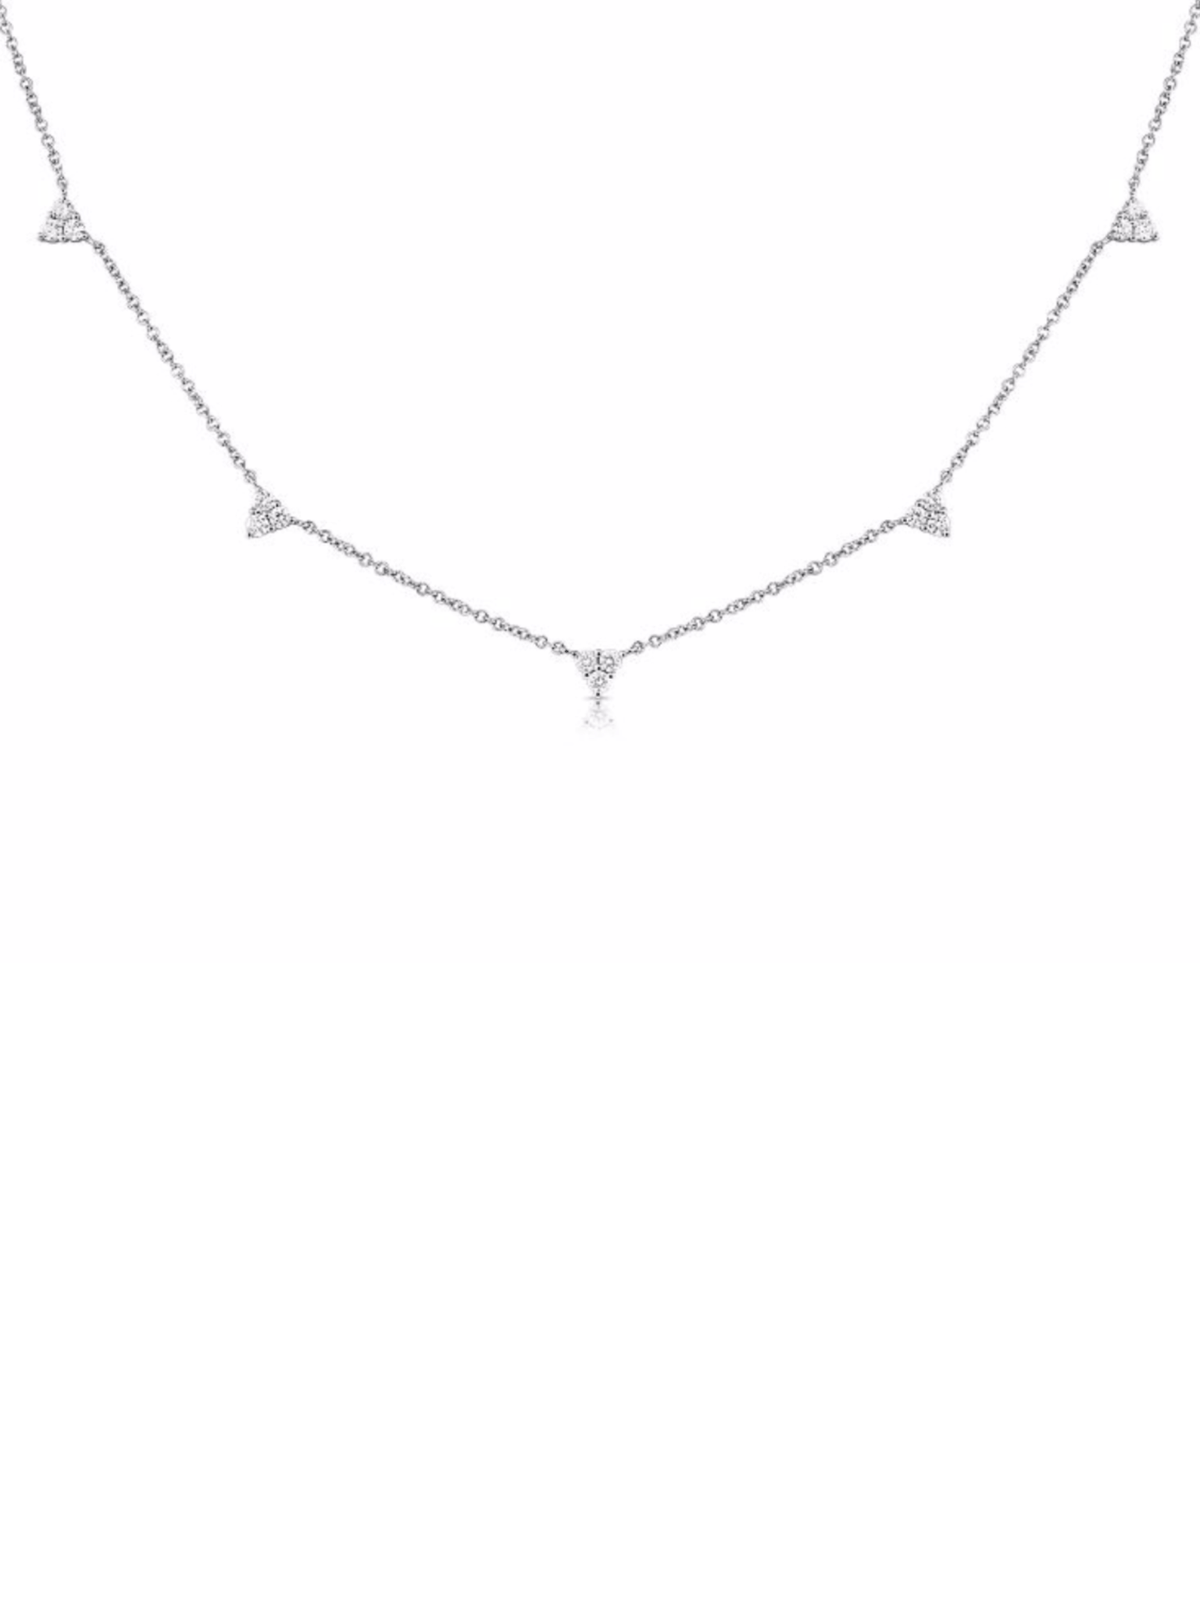 white gold chain necklace with mini diamond trios stationed in between chain on white background